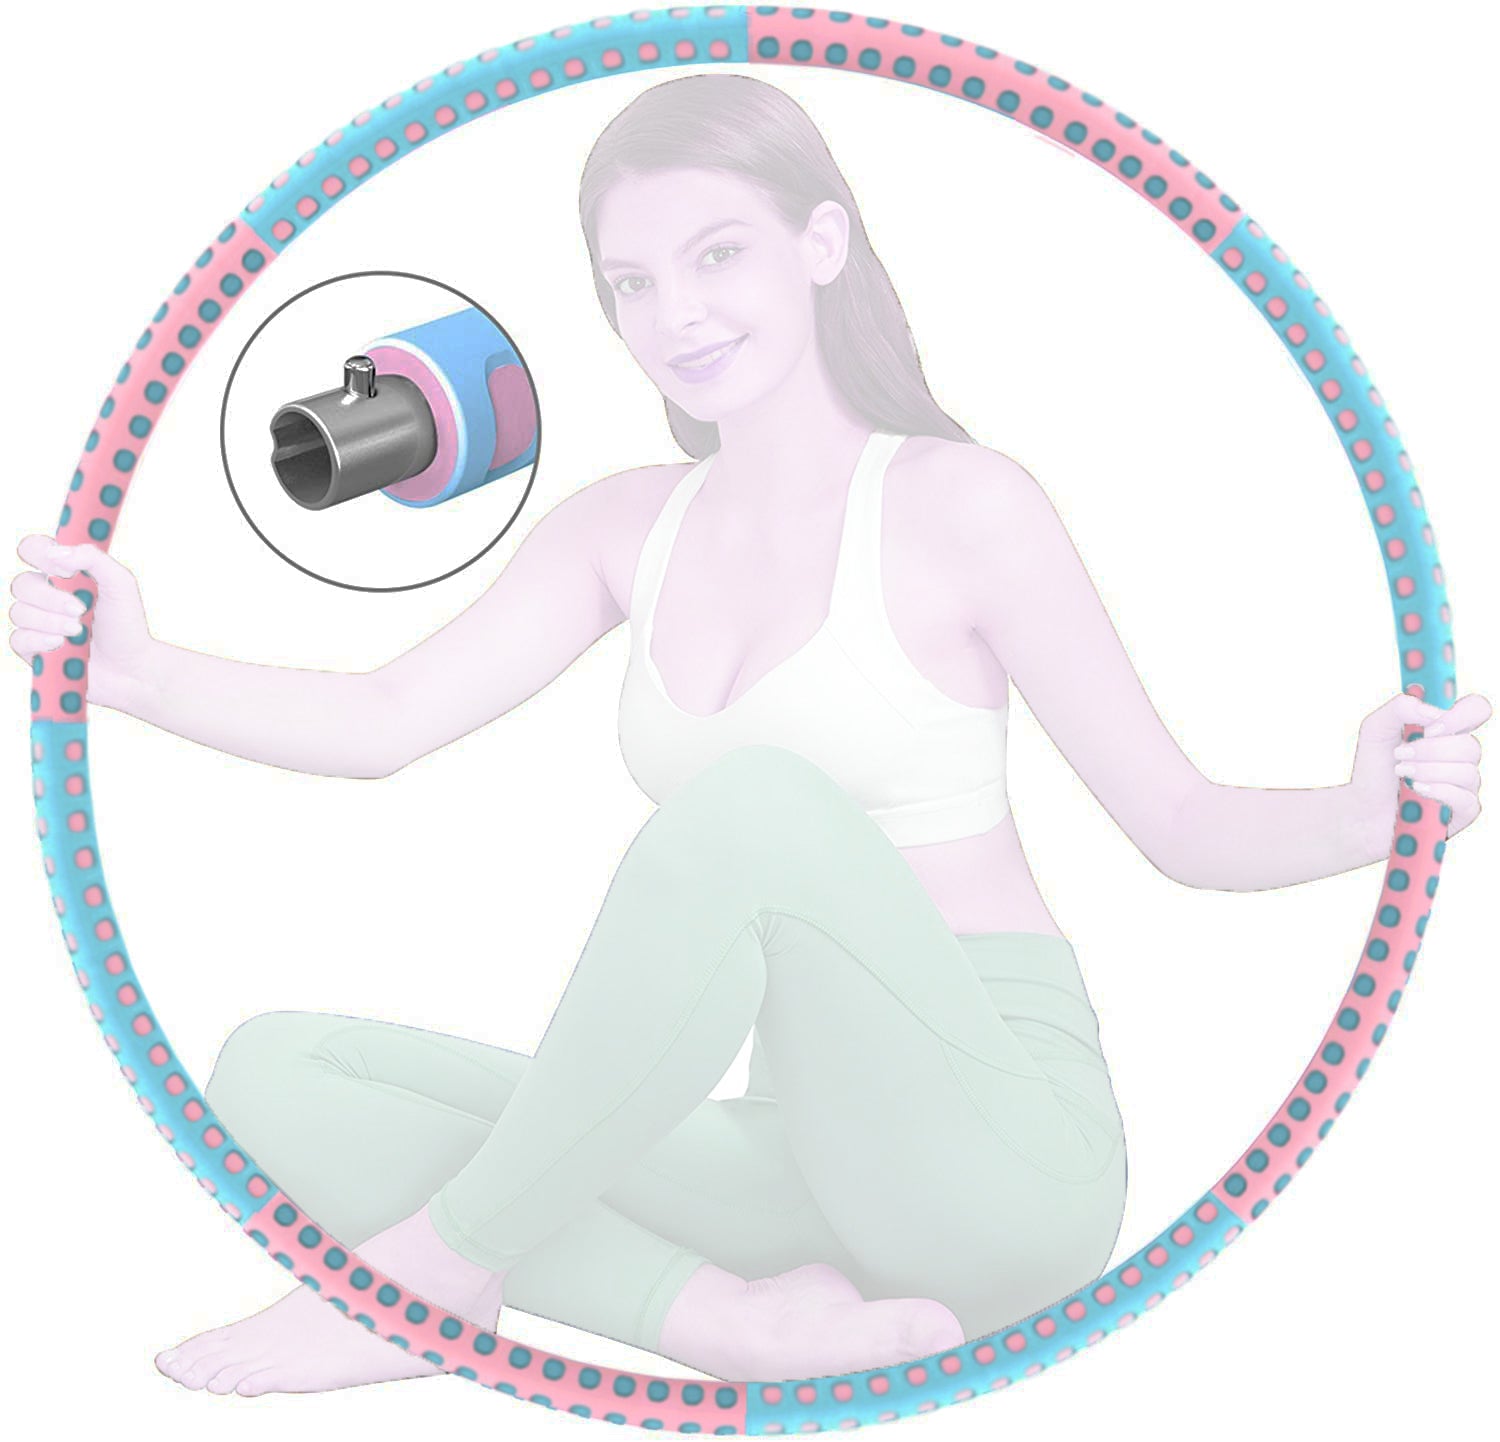 Zenmarkt Smart Weighted Hula Hoop for Adults - 8 Section Detachable Exercise Hula Hoop for Women, Soft Padded Exercise Hoop, Portable and Adjustable Fitness Circle for Gym Home Workouts